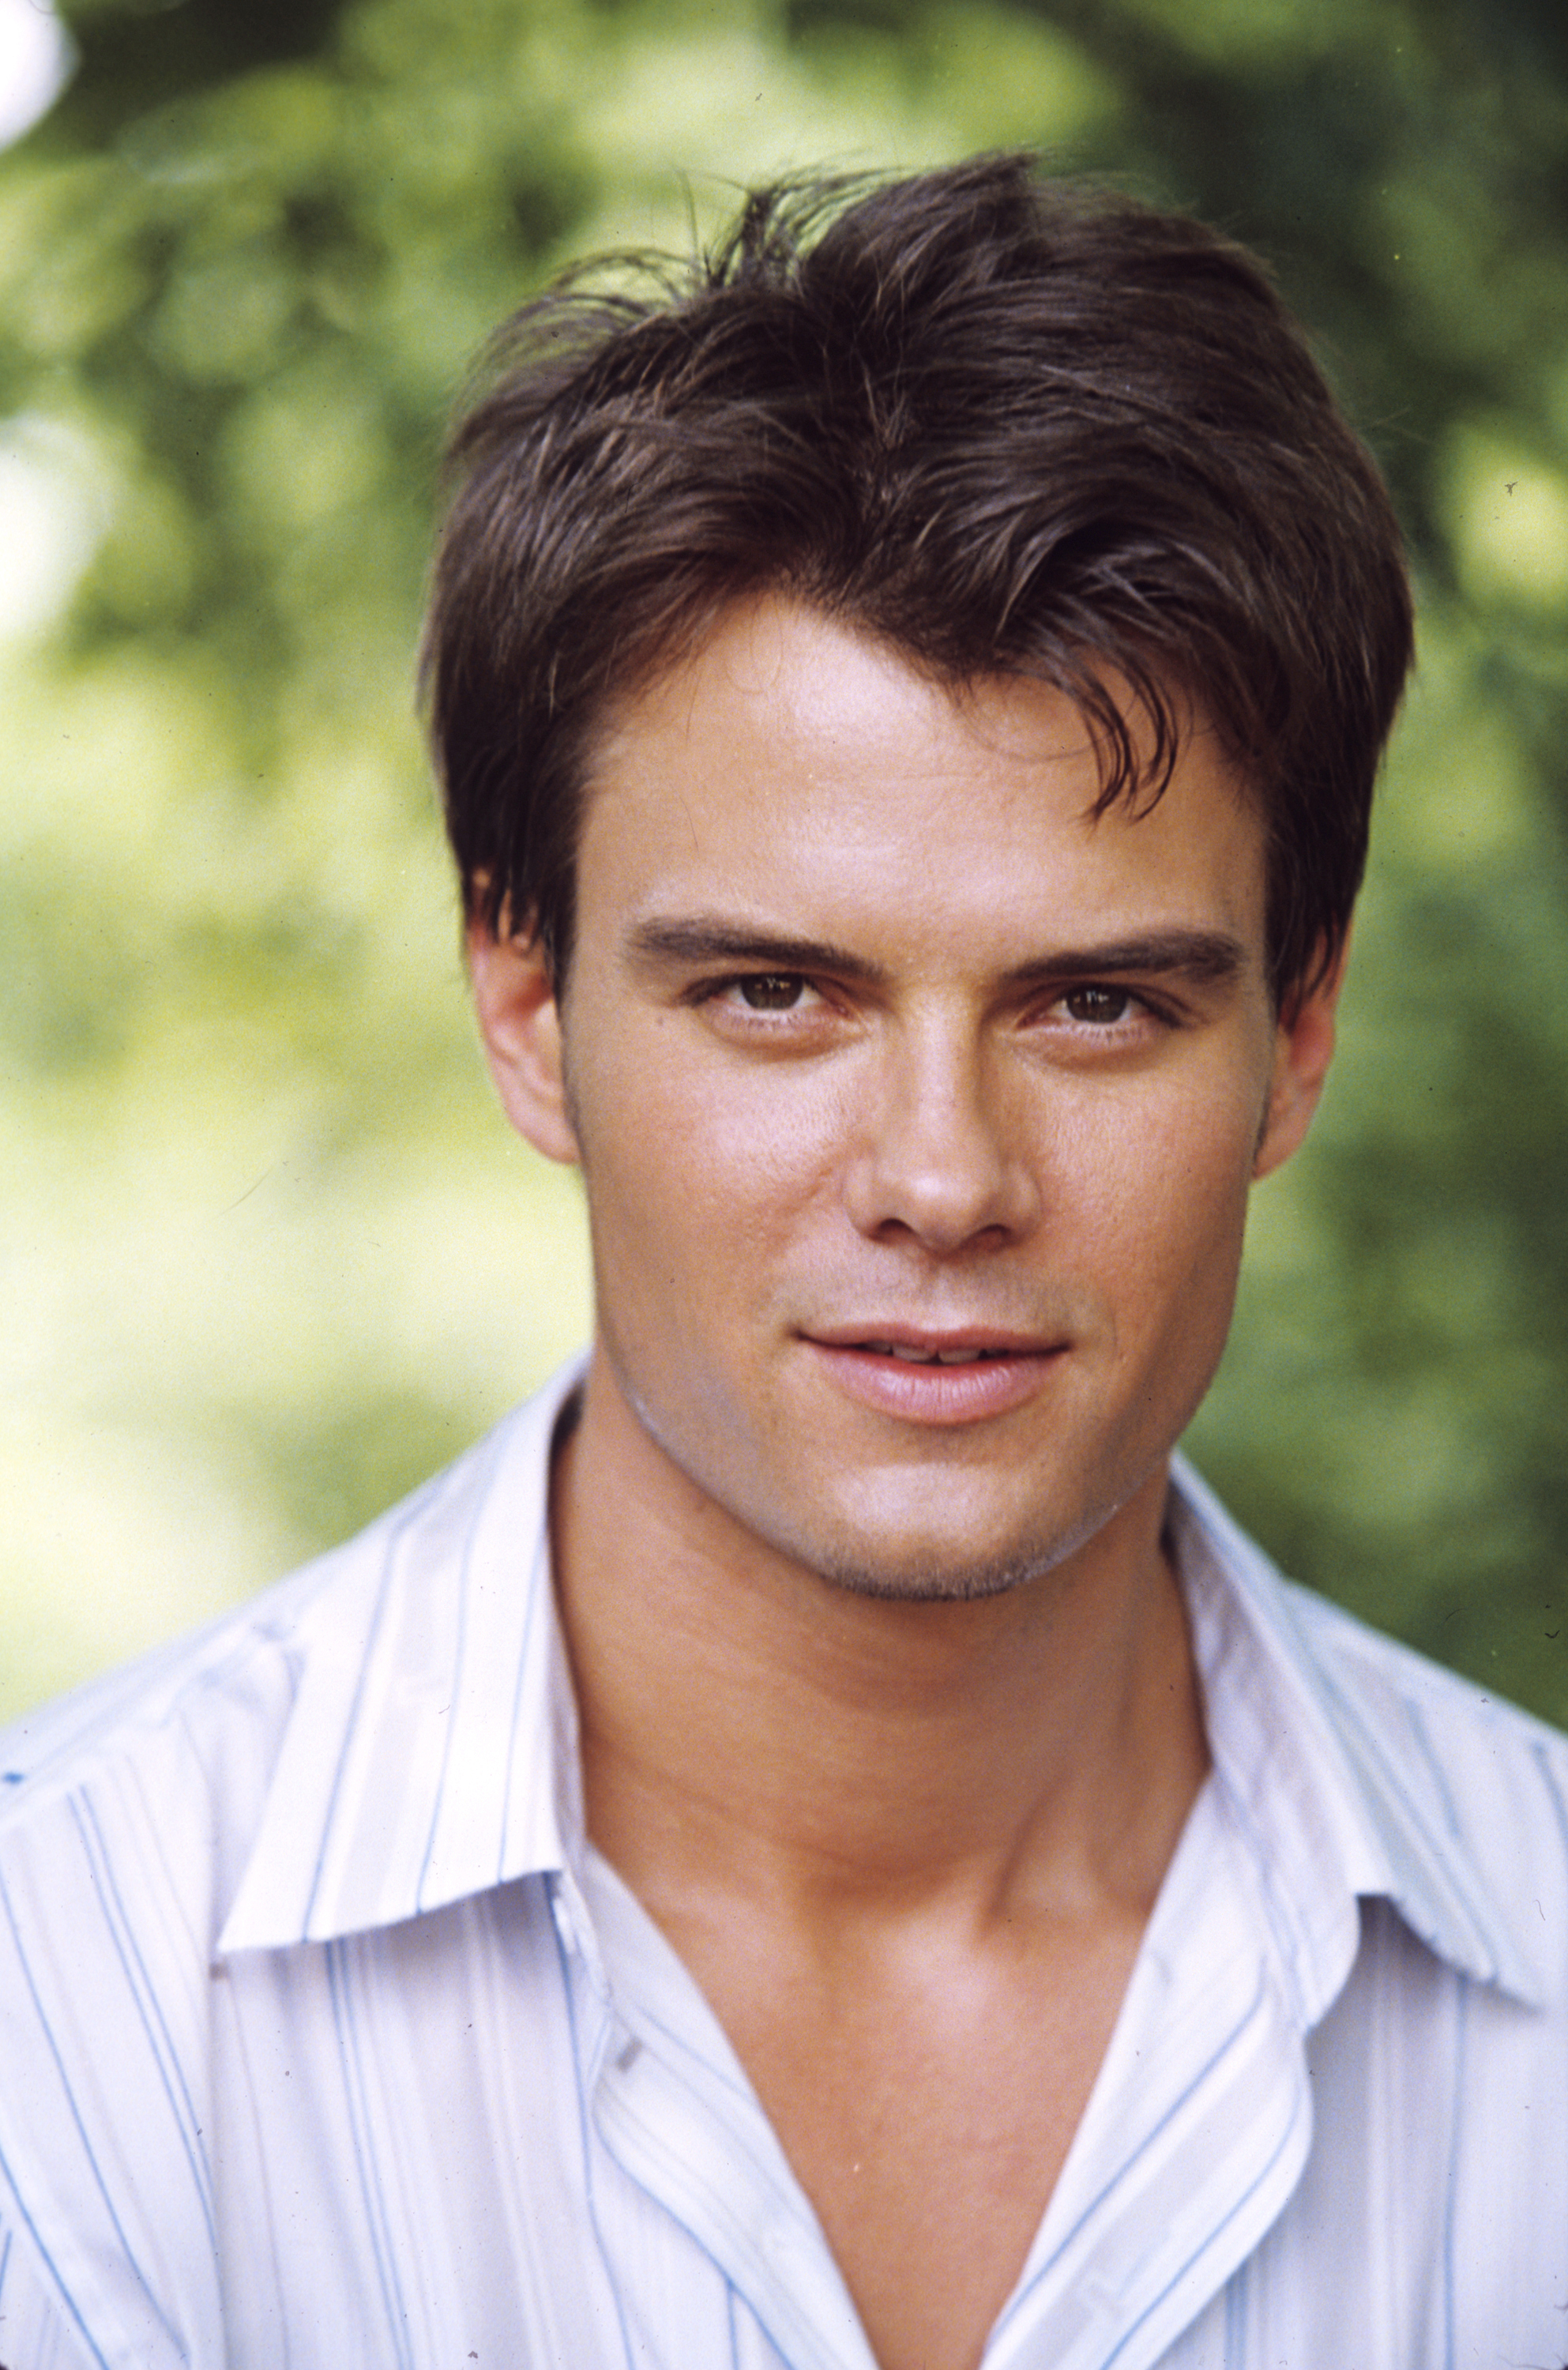 Josh Duhamel as Leo on location for "All My Children" on July 15, 2002 in Central Park | Source: Getty Images